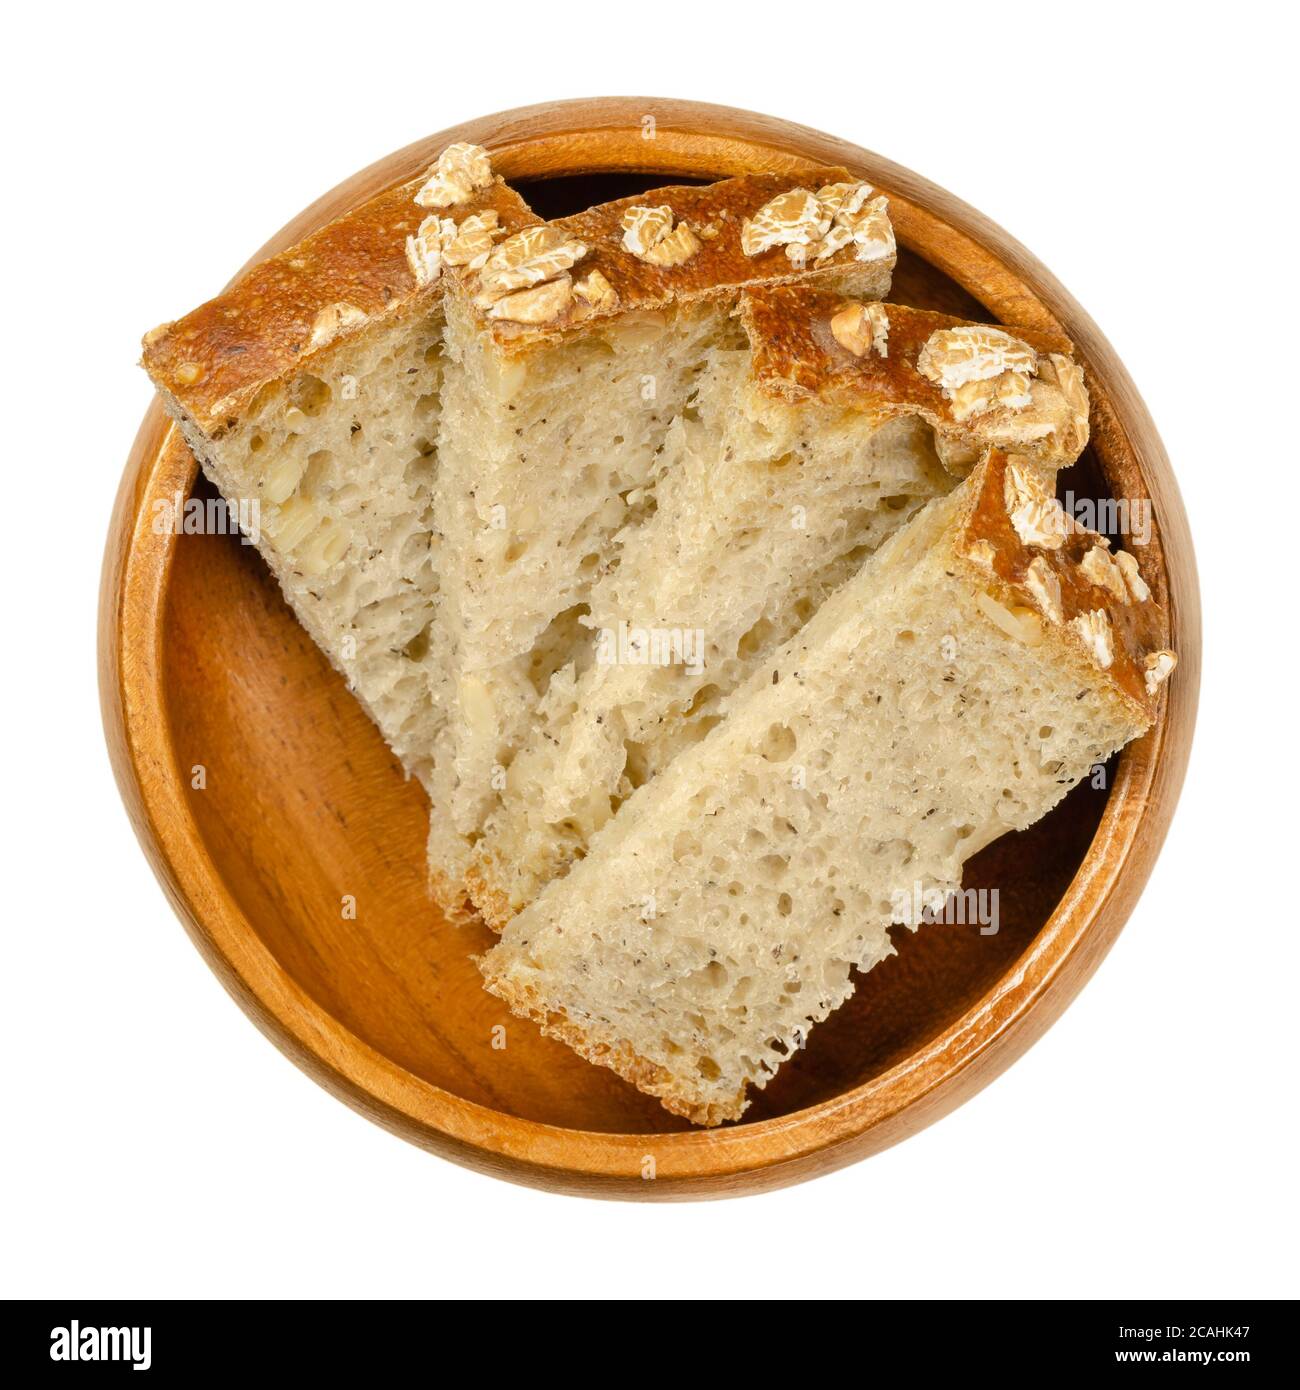 Slices of spelt bread in a wooden bowl. Brown sourdough bread, a mix of spelt flour, leaven, sunflower seeds and spices, baked in an oven. Staple food Stock Photo